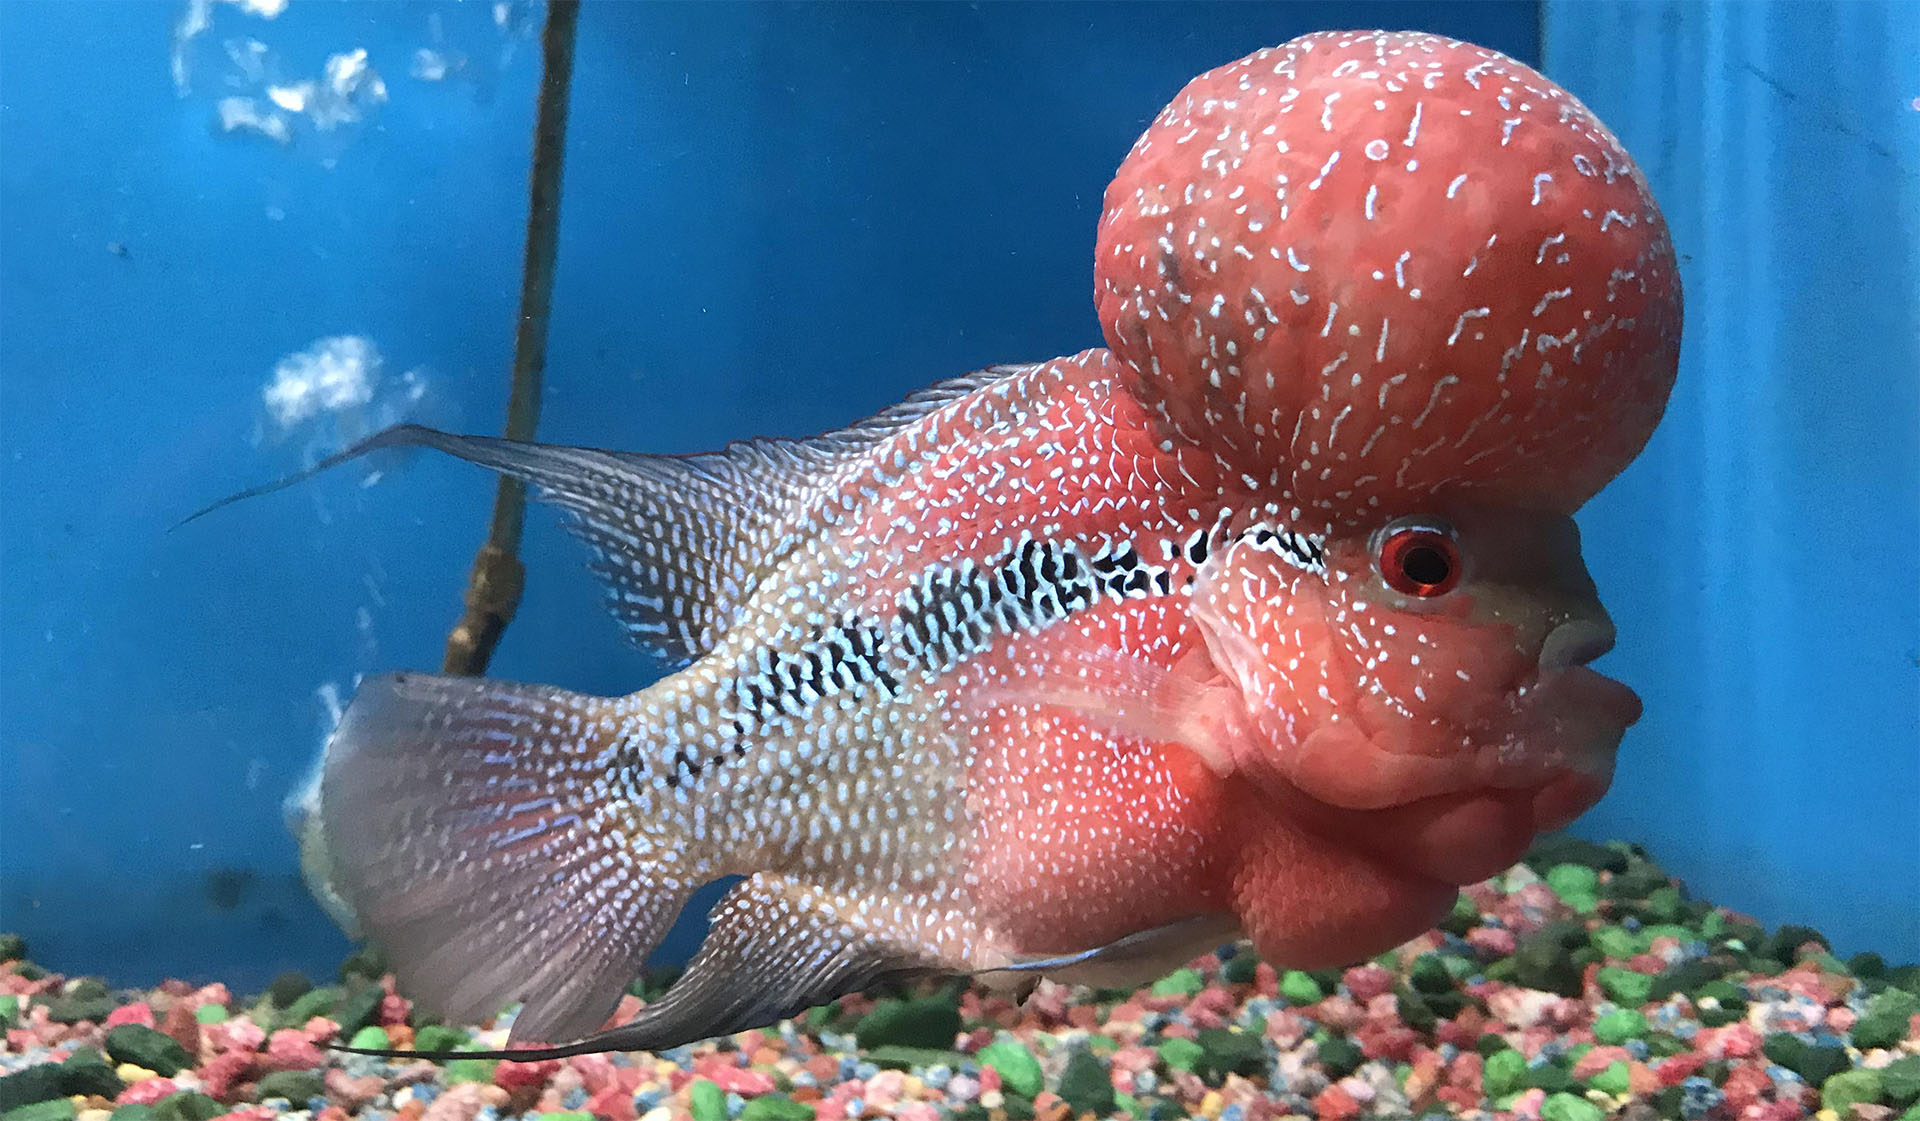 Flowerhorn cichlid Top 10 Most Beautiful Colorful Fish Types - 5